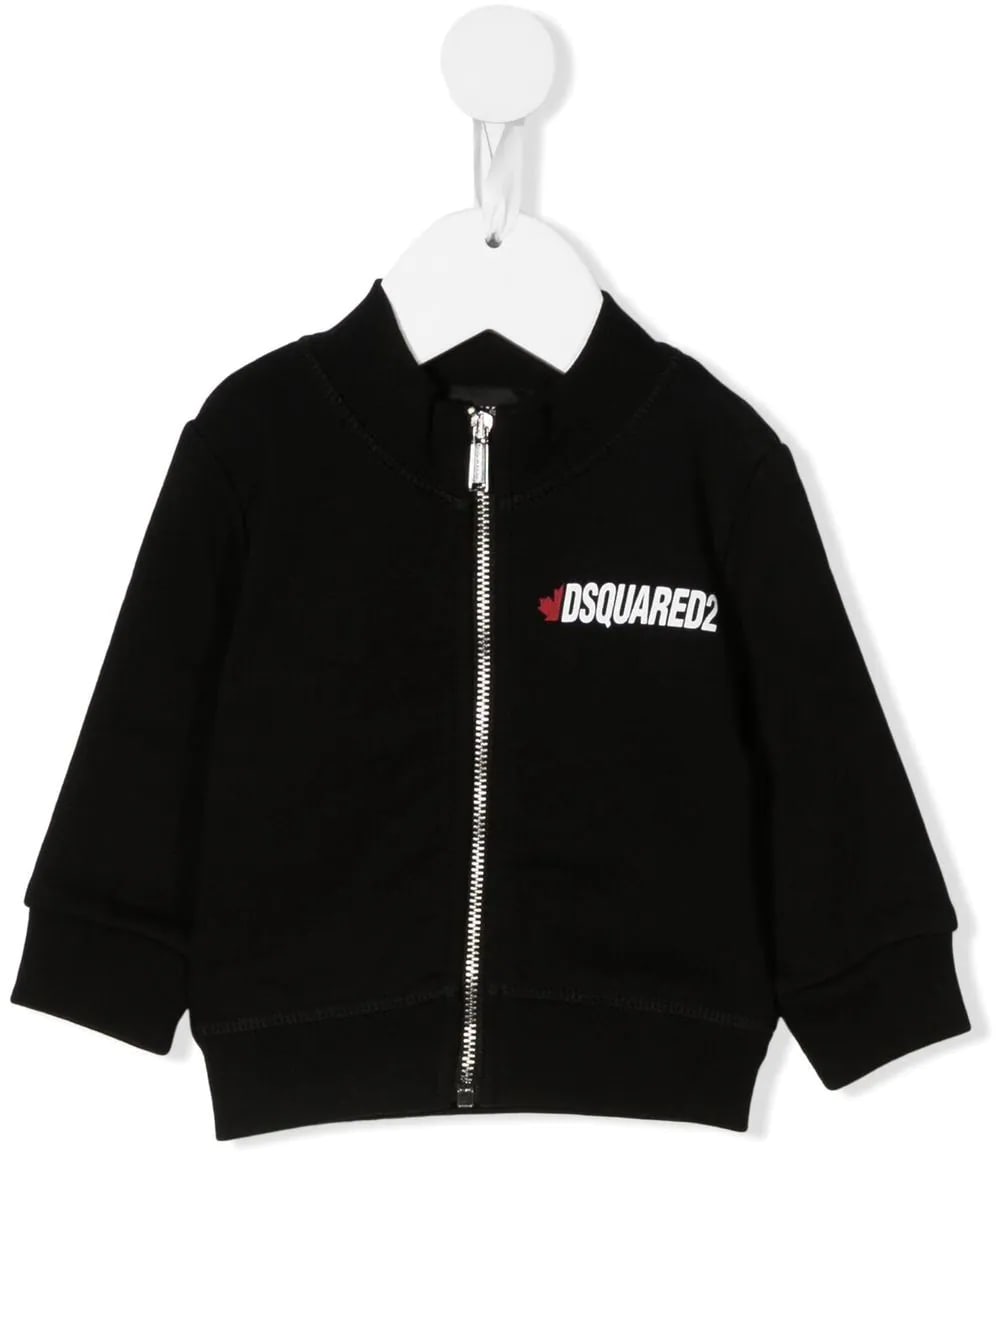 Dsquared2 Baby Black Sweatshirt With Zip And White Printed Logo